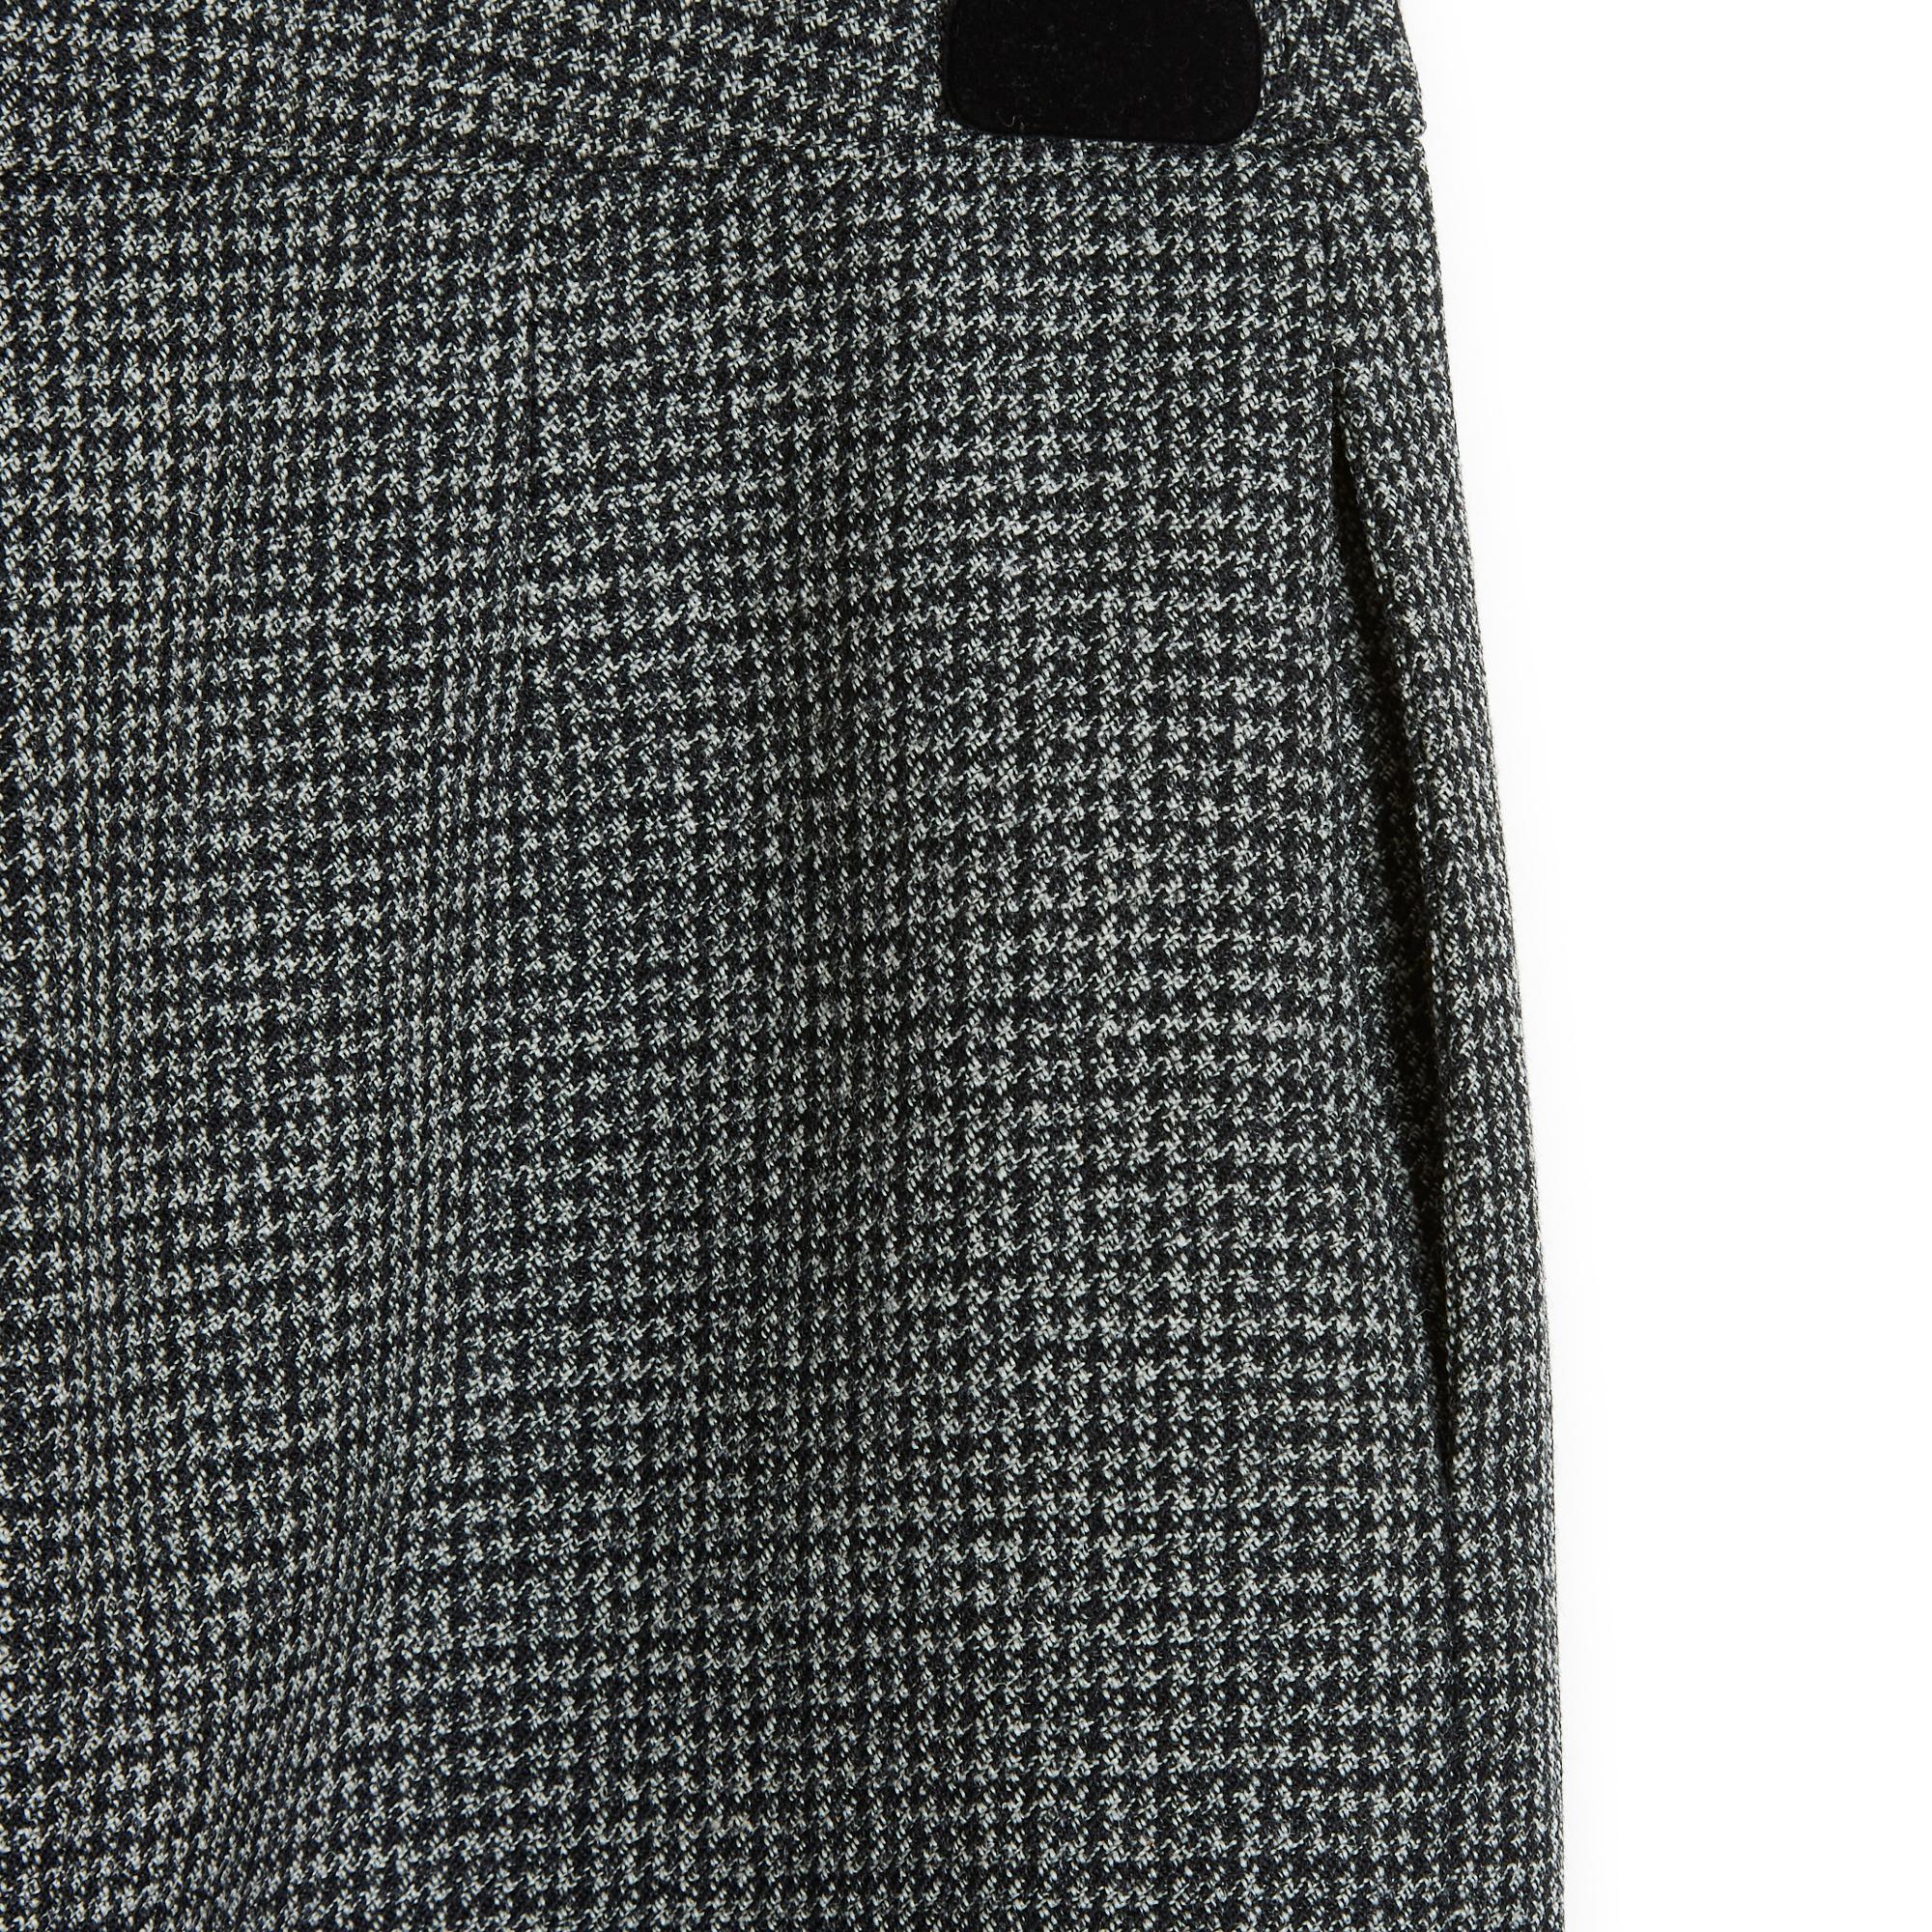 Saint Laurent skirt by Hedi Slimane short in thick woolen cloth, houndstooth pattern in anthracite gray and black, 2 slit pockets on the sides, black silk lining, closed with a hook and a zip on the side. Size FR38: waist 37 cm, length 39.5 cm in